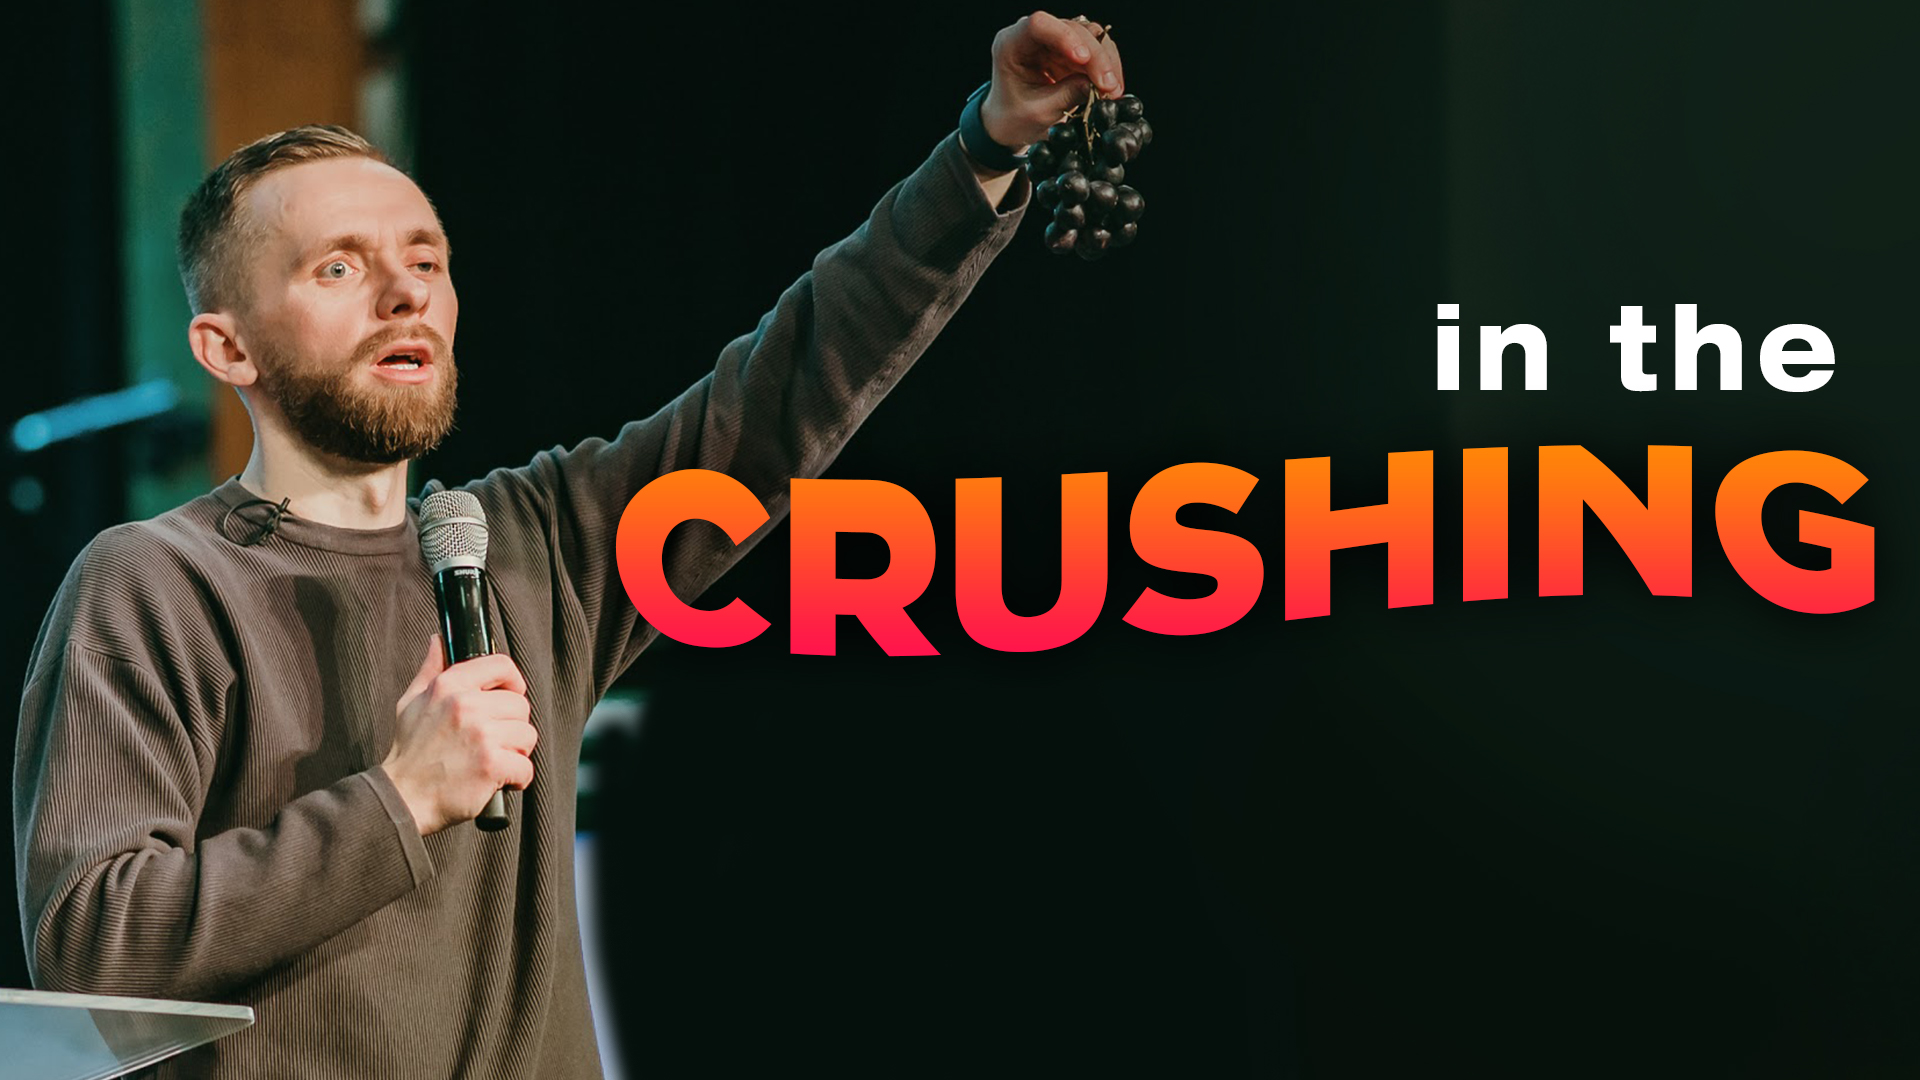 Featured image for “In the Crushing”